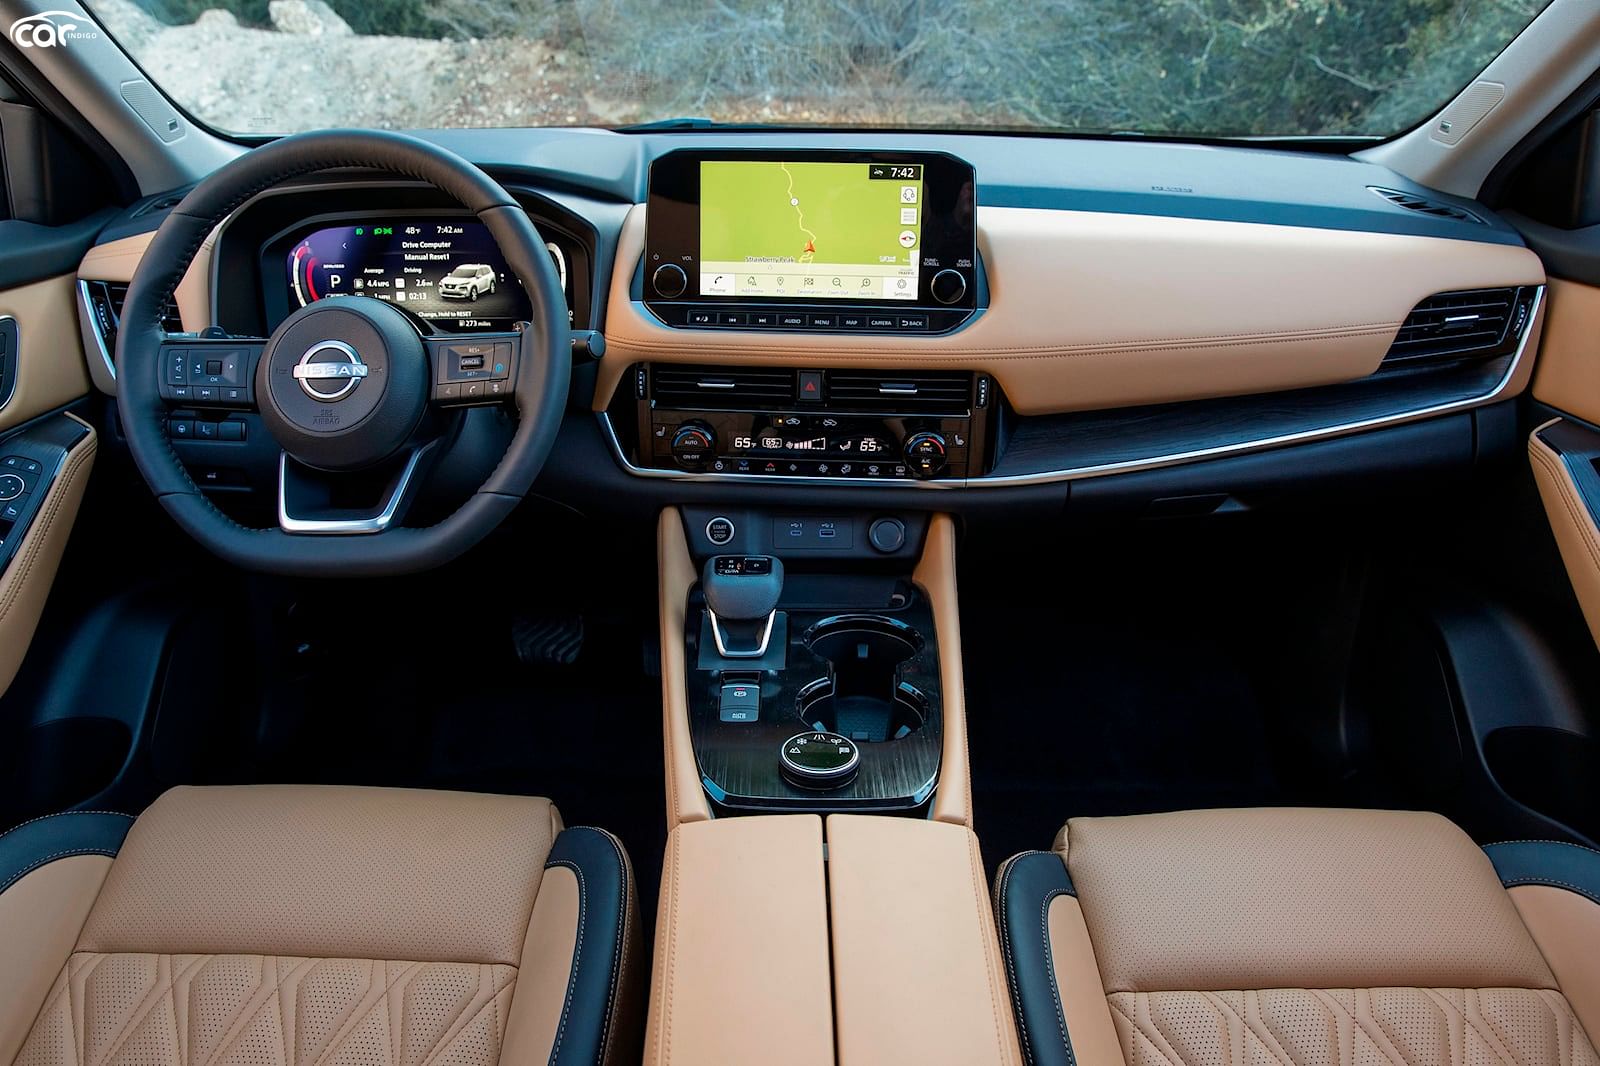 2022 Nissan Rogue Interior Review - Seating, Infotainment, Dashboard and  Features | CarIndigo.com